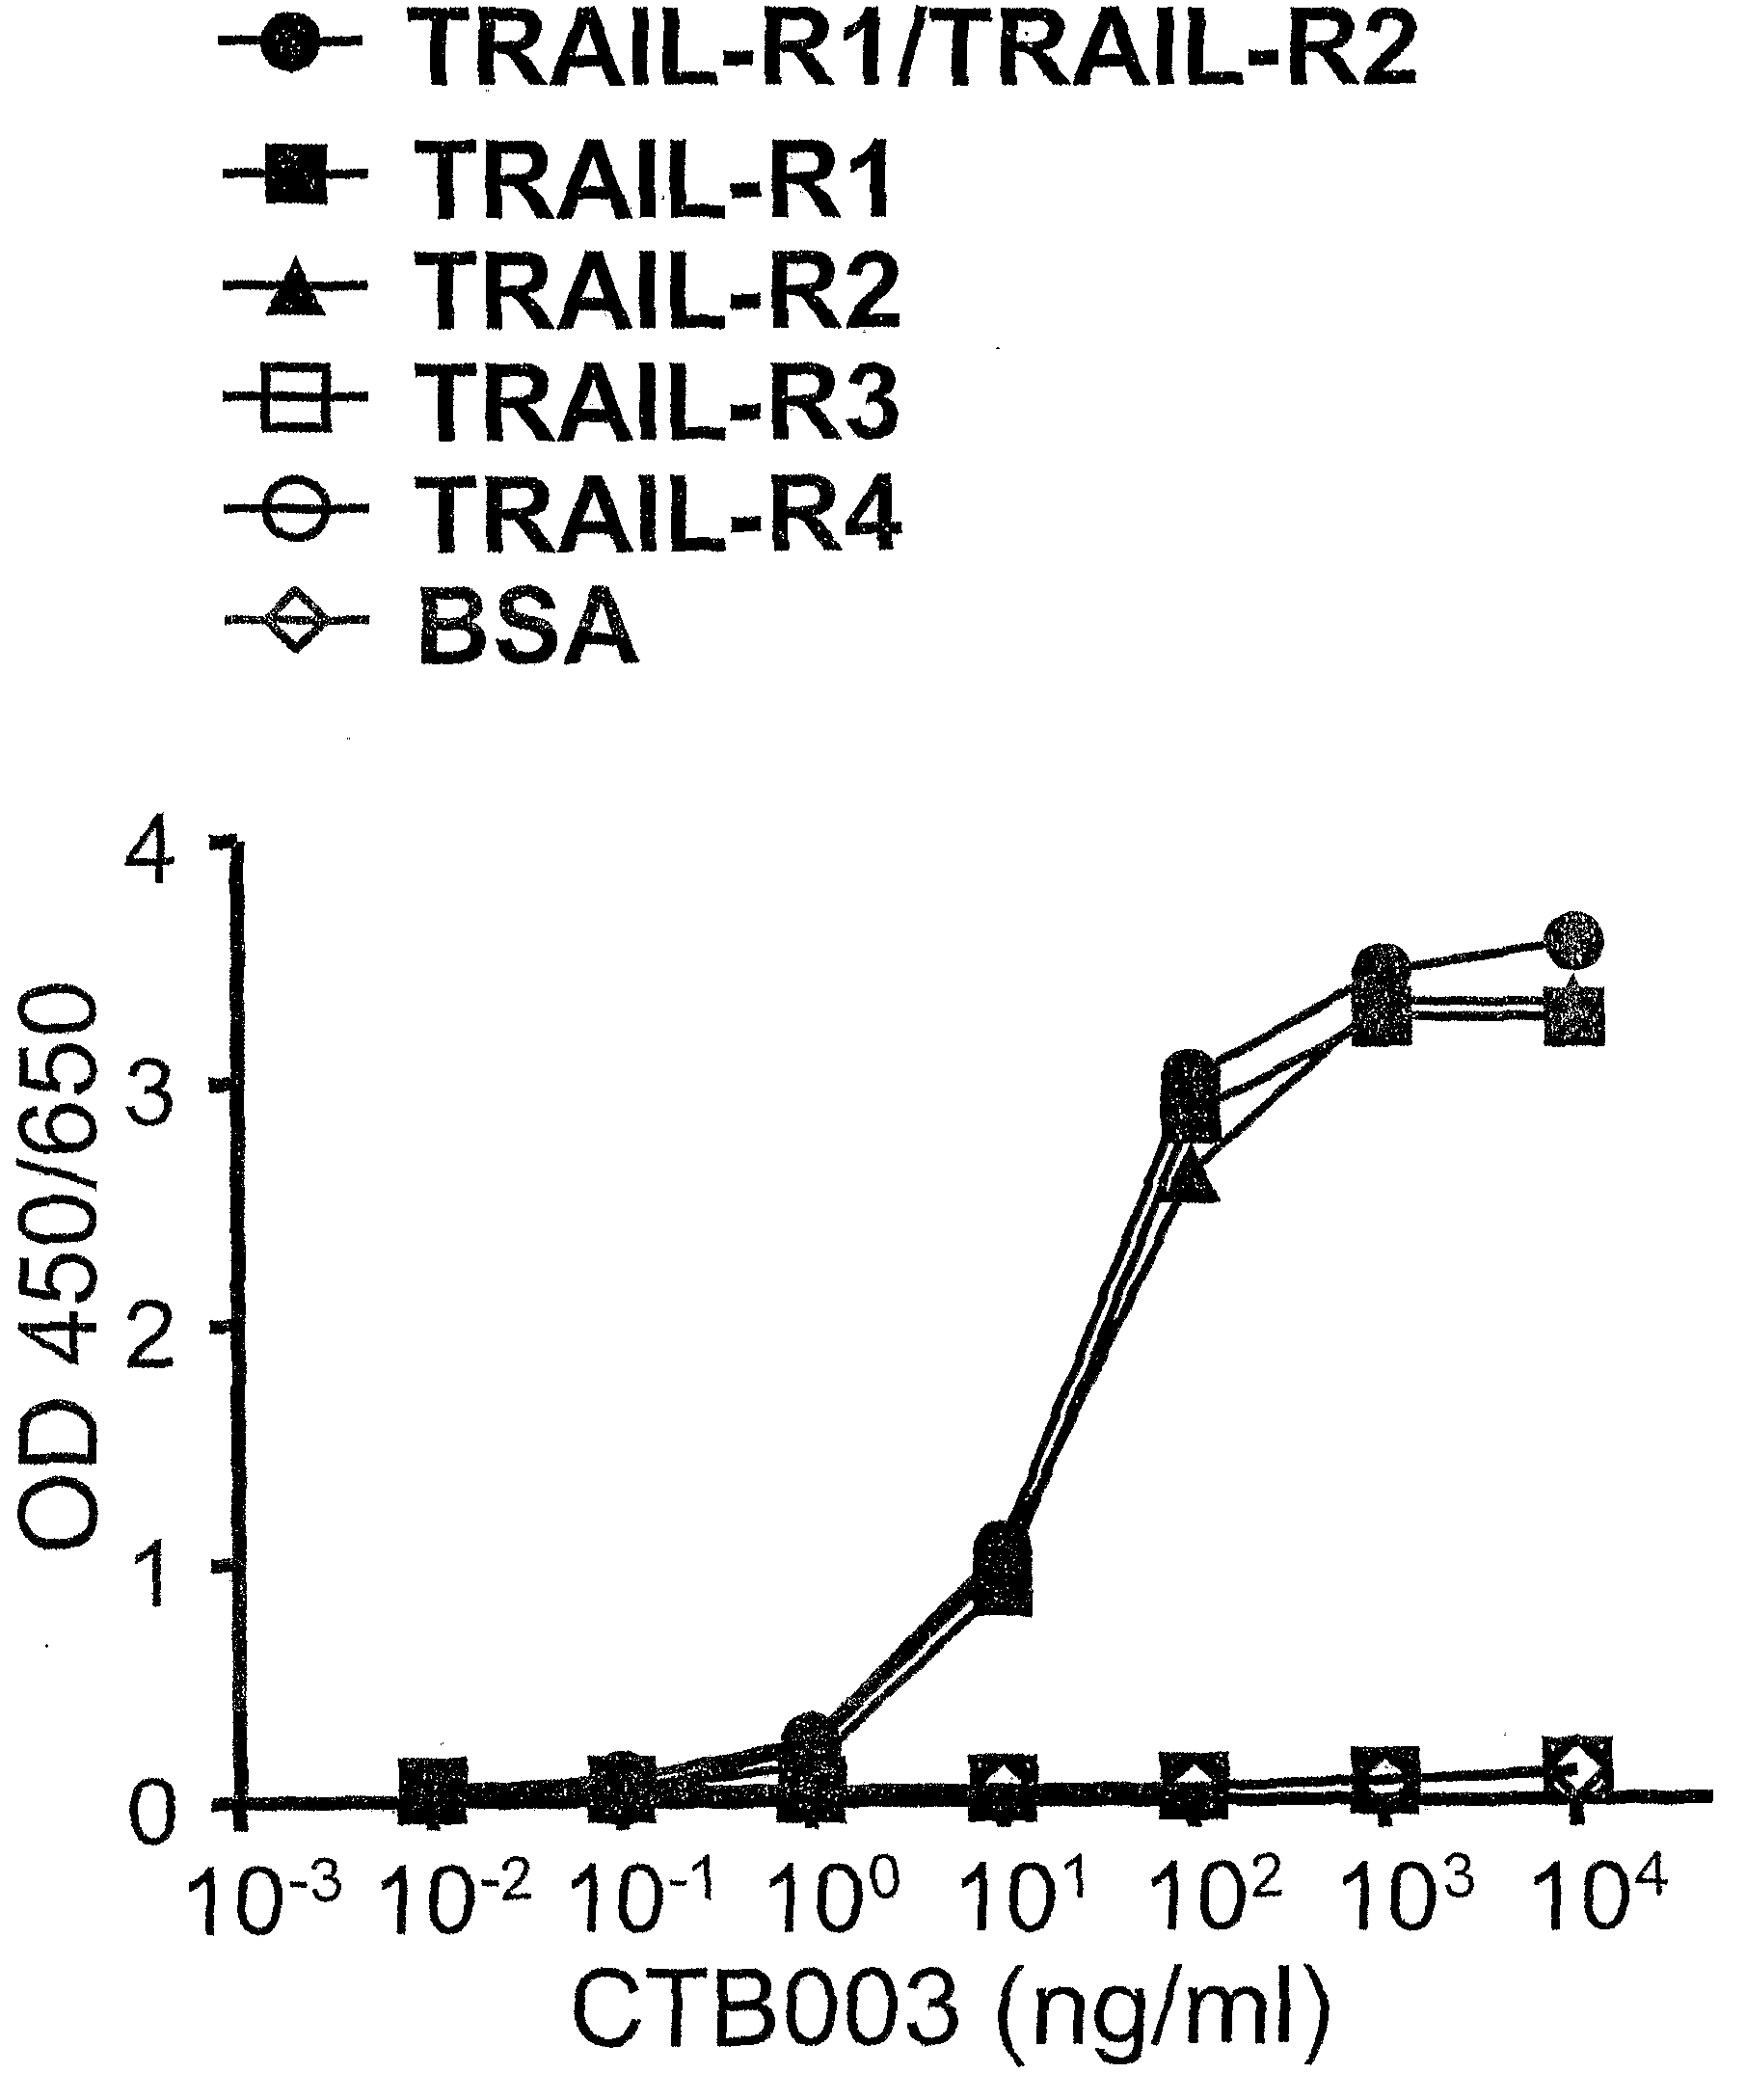 Trail receptor-binding agents and uses of the same